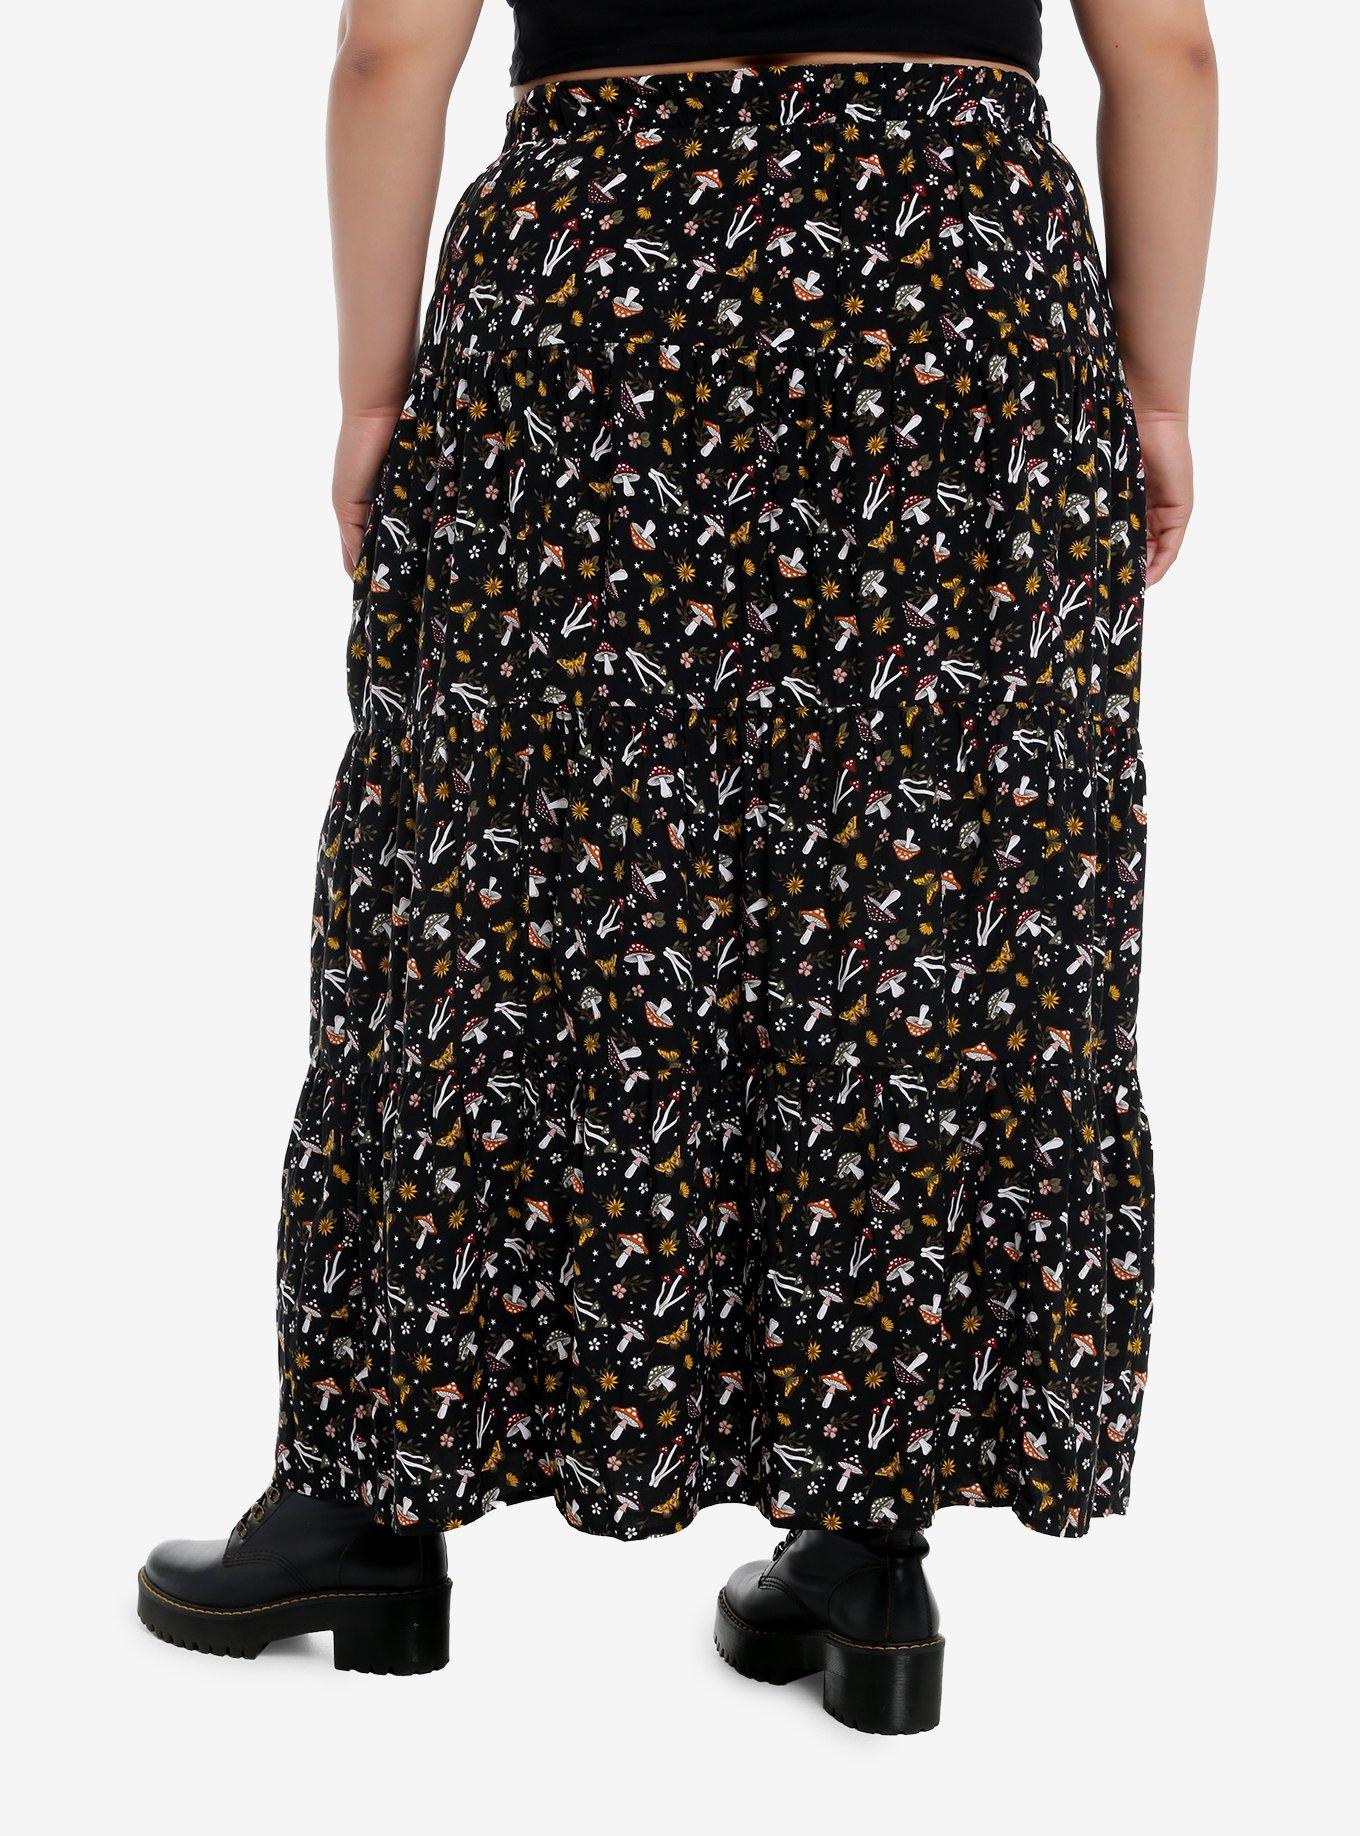 Thorn & Fable Mushroom Floral Tiered Maxi Skirt Plus Size, , hi-res